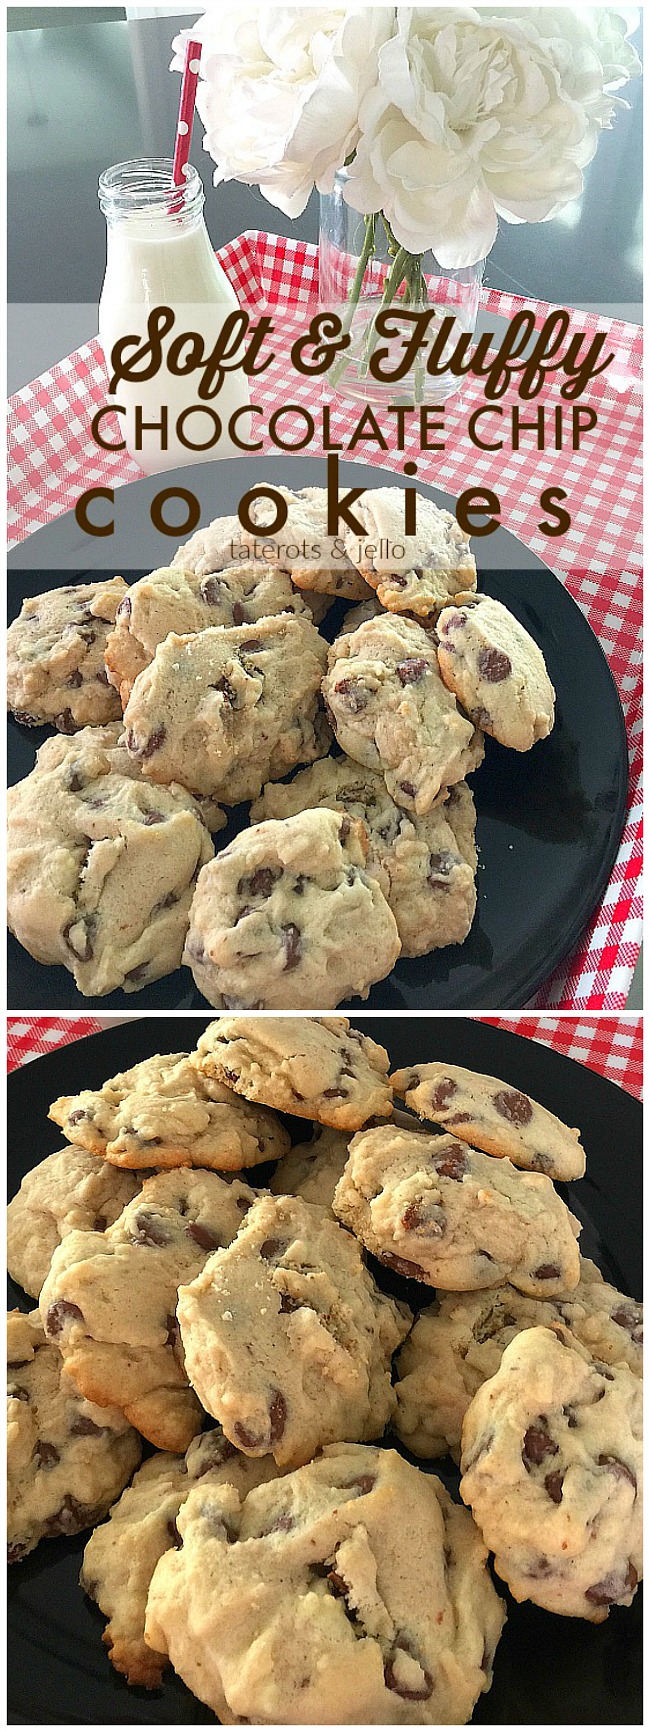 Light and Fluffy Chocolate Chip Cookies. These cookies are light and airy and filled with chocolate chips. They require no brown sugar so they are not as sweet as a traditional chocolate chip cookie, with a firm outside and soft and chewy inside.